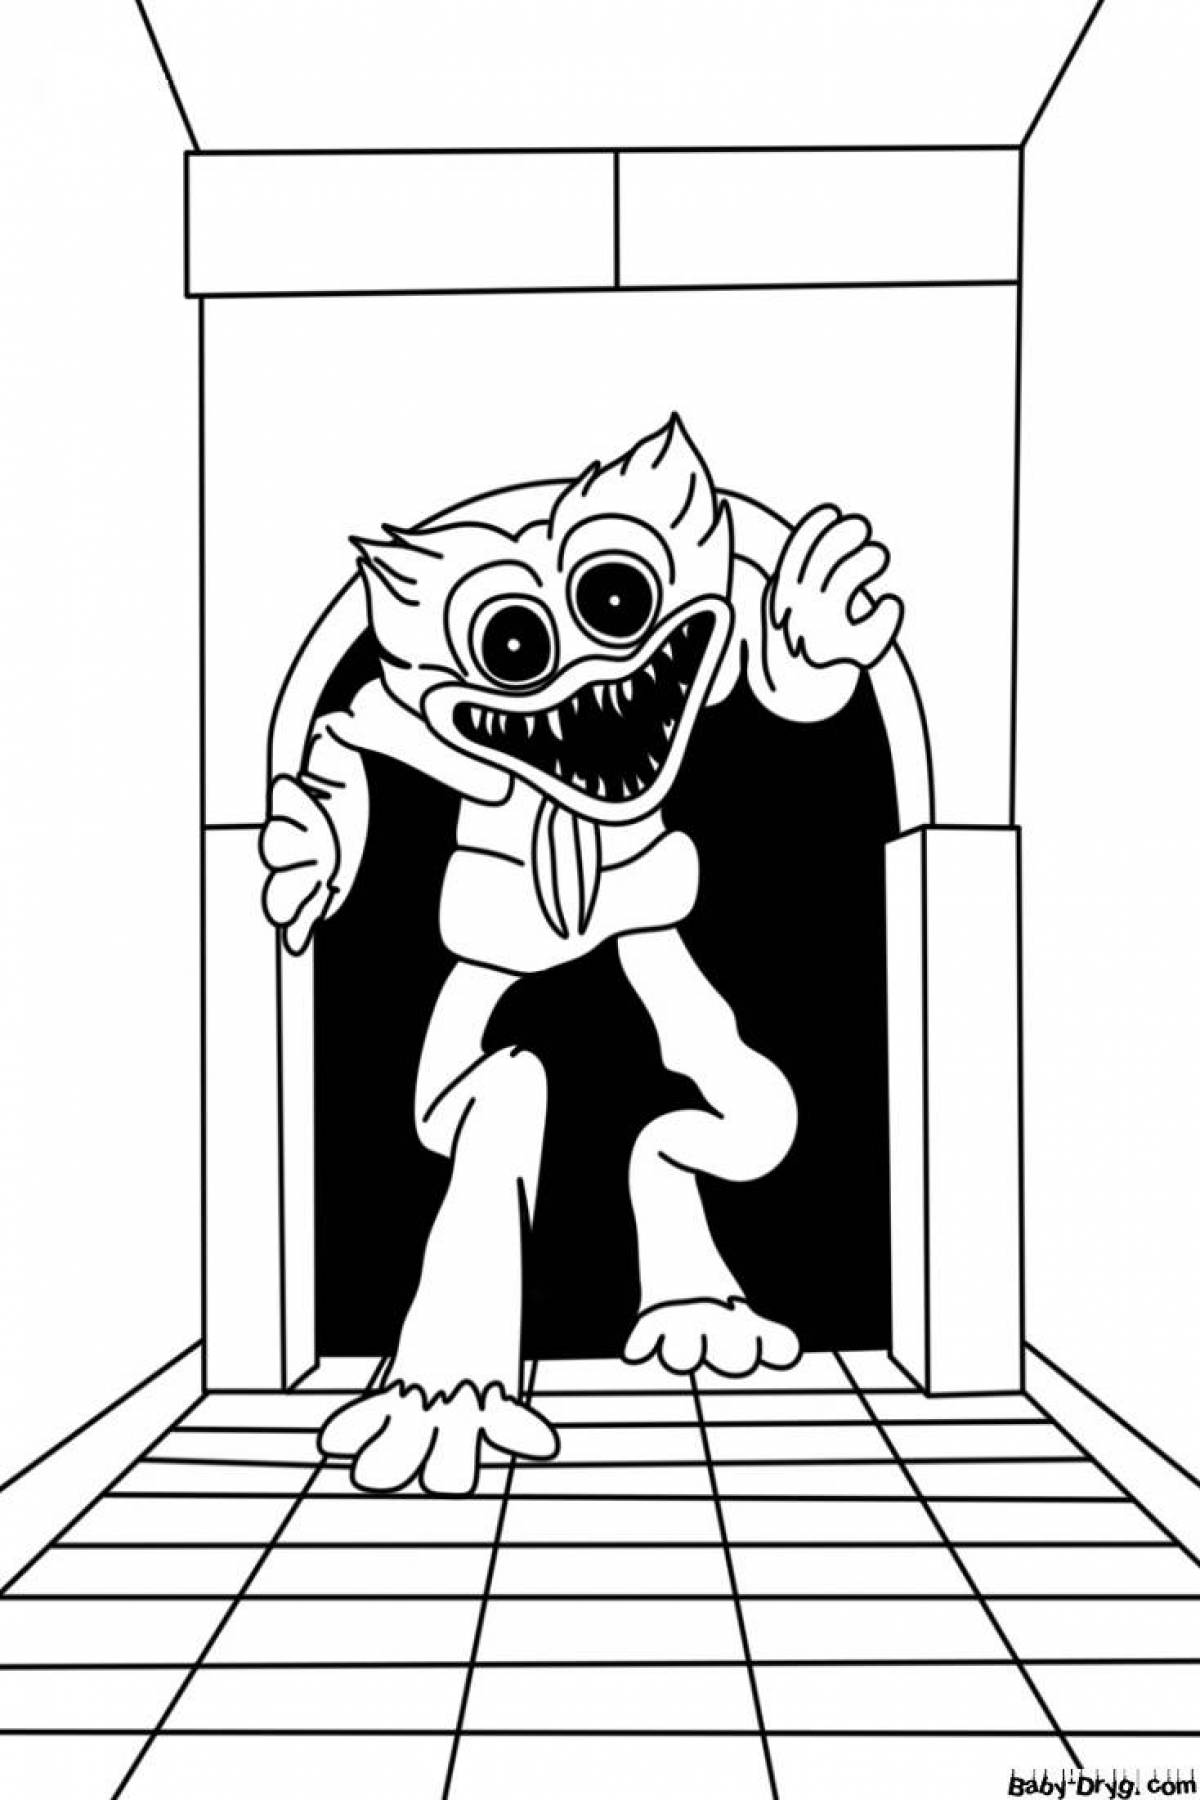 Tilly willy animated coloring page